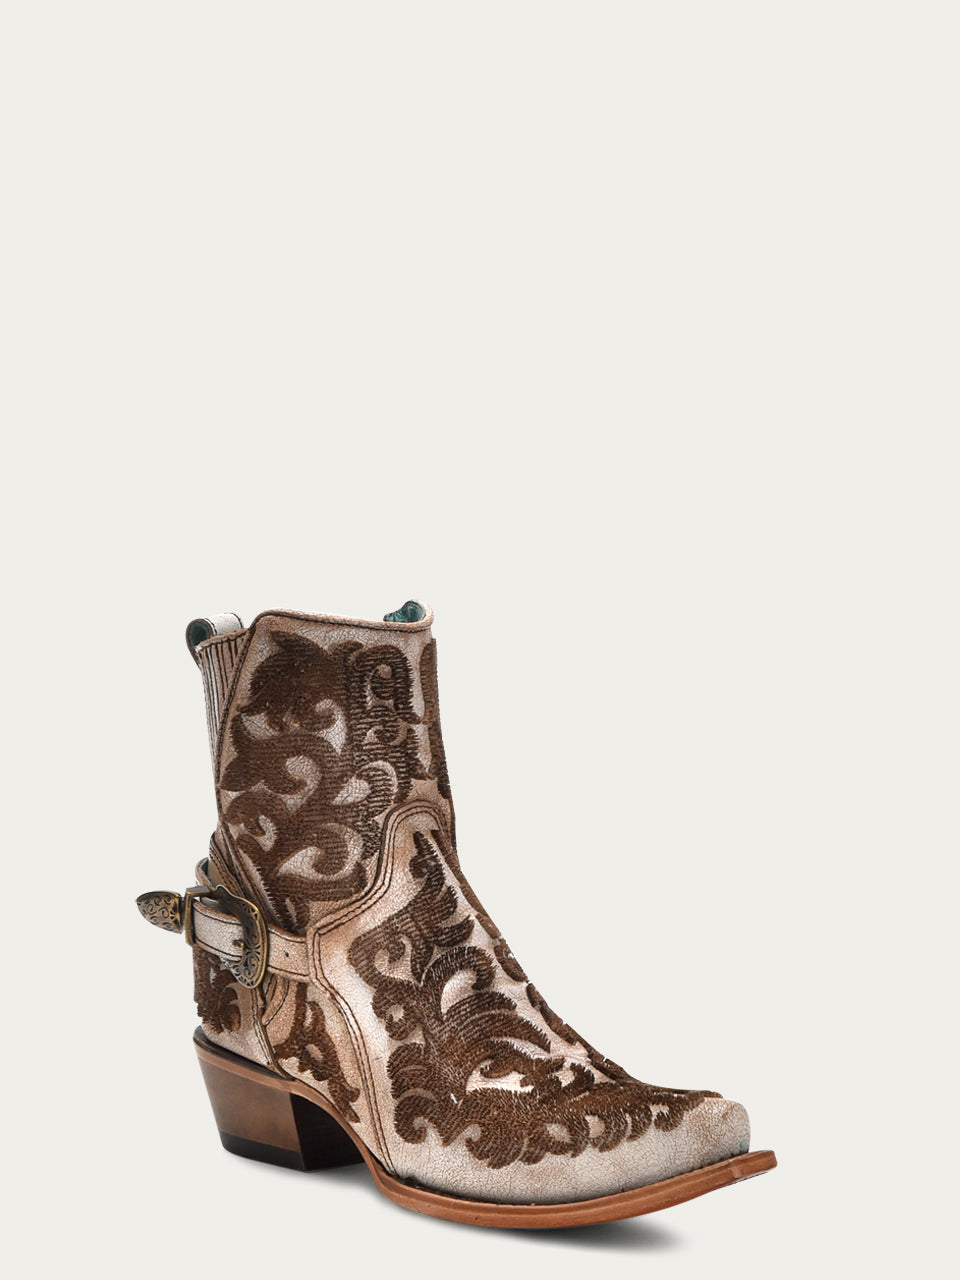 C4108 - WOMEN'S BROWN 3D BRISTLE EMBROIDERY WITH STRAP AND ZIPPER DISTRESSED BEIGE SNIP TOE ANKLE BOOT